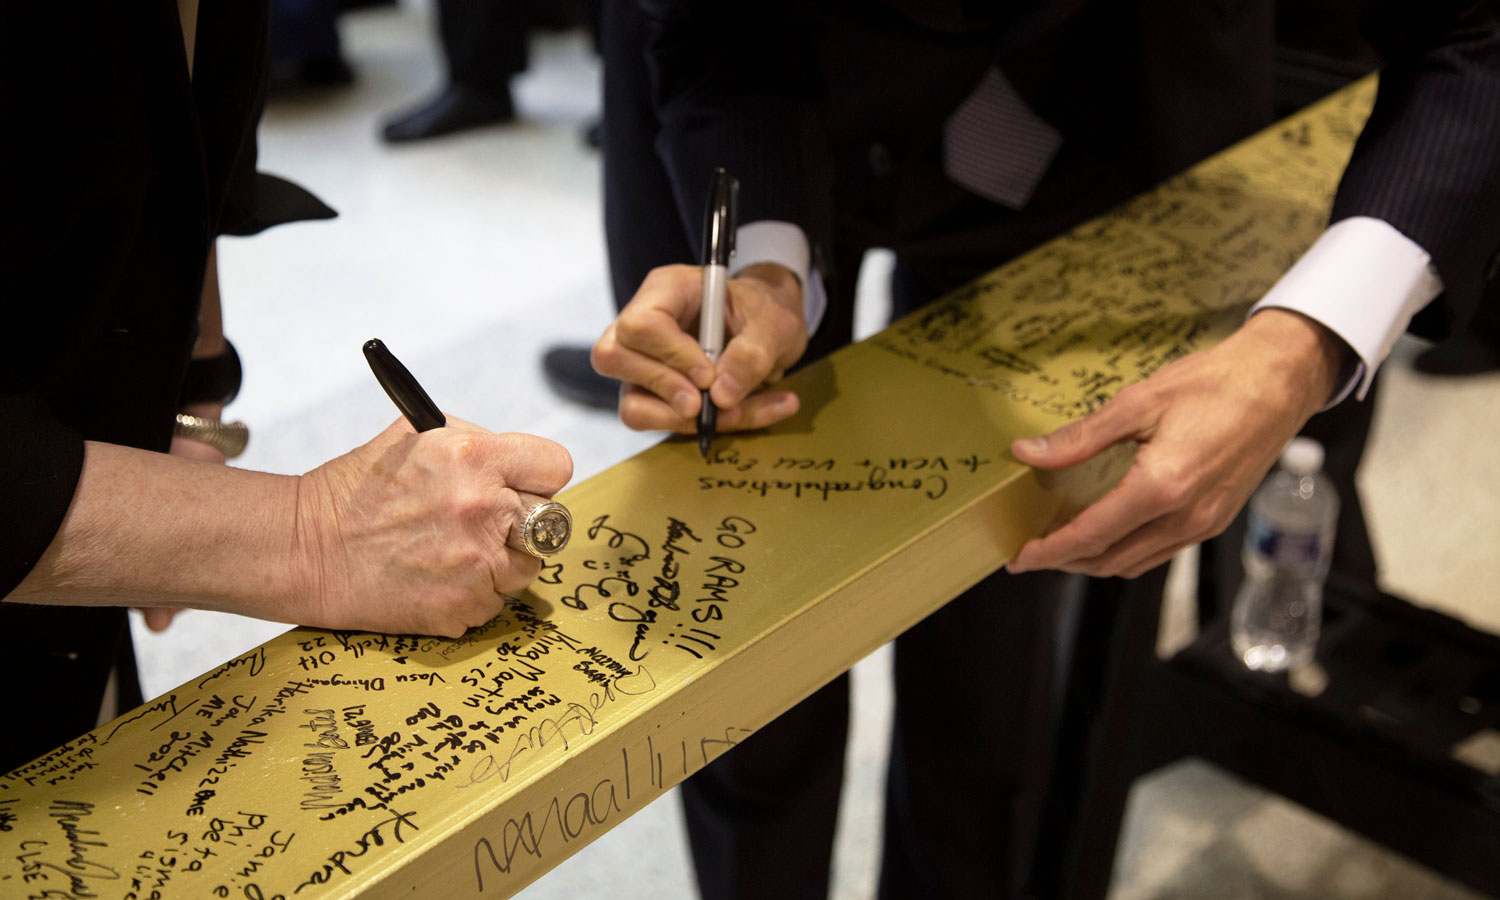 Dean Boyan and VCU president Michael Rao signing the beam